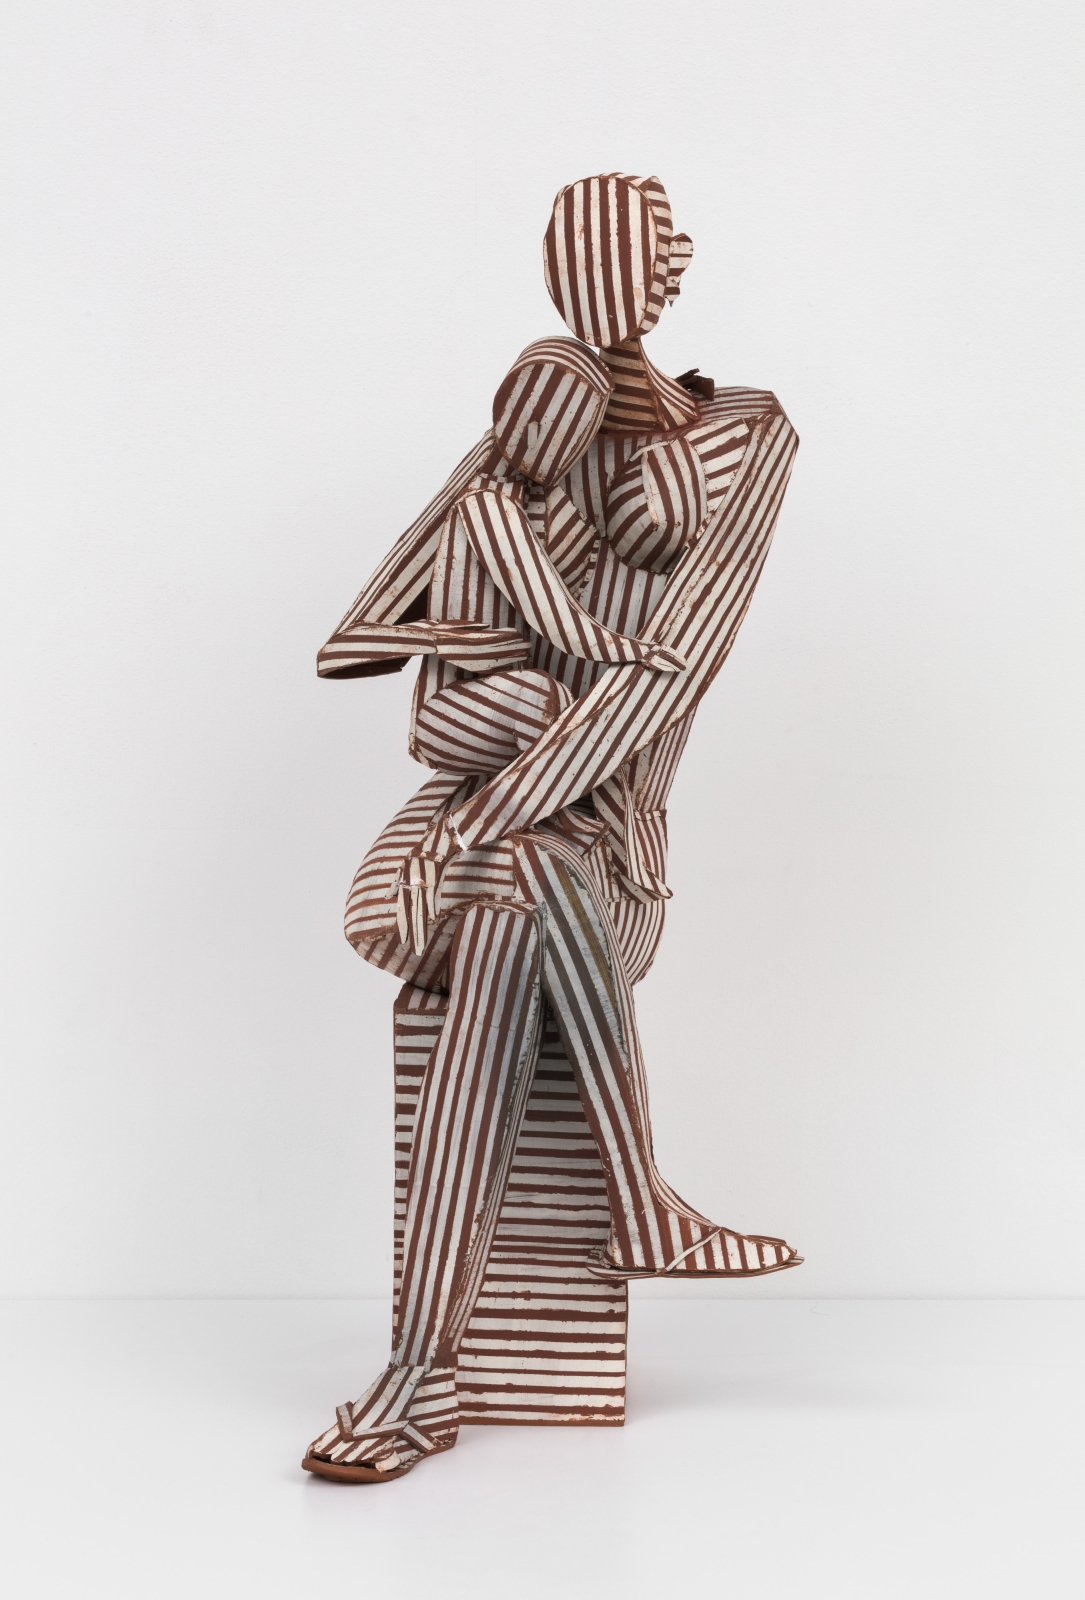 Ann Agee
Folded In Madonna, 2021
earthenware with slip, oxides and epoxy putty
30 x 15 x 14 ins.
76.2 x 38.1 x 35.6 cm